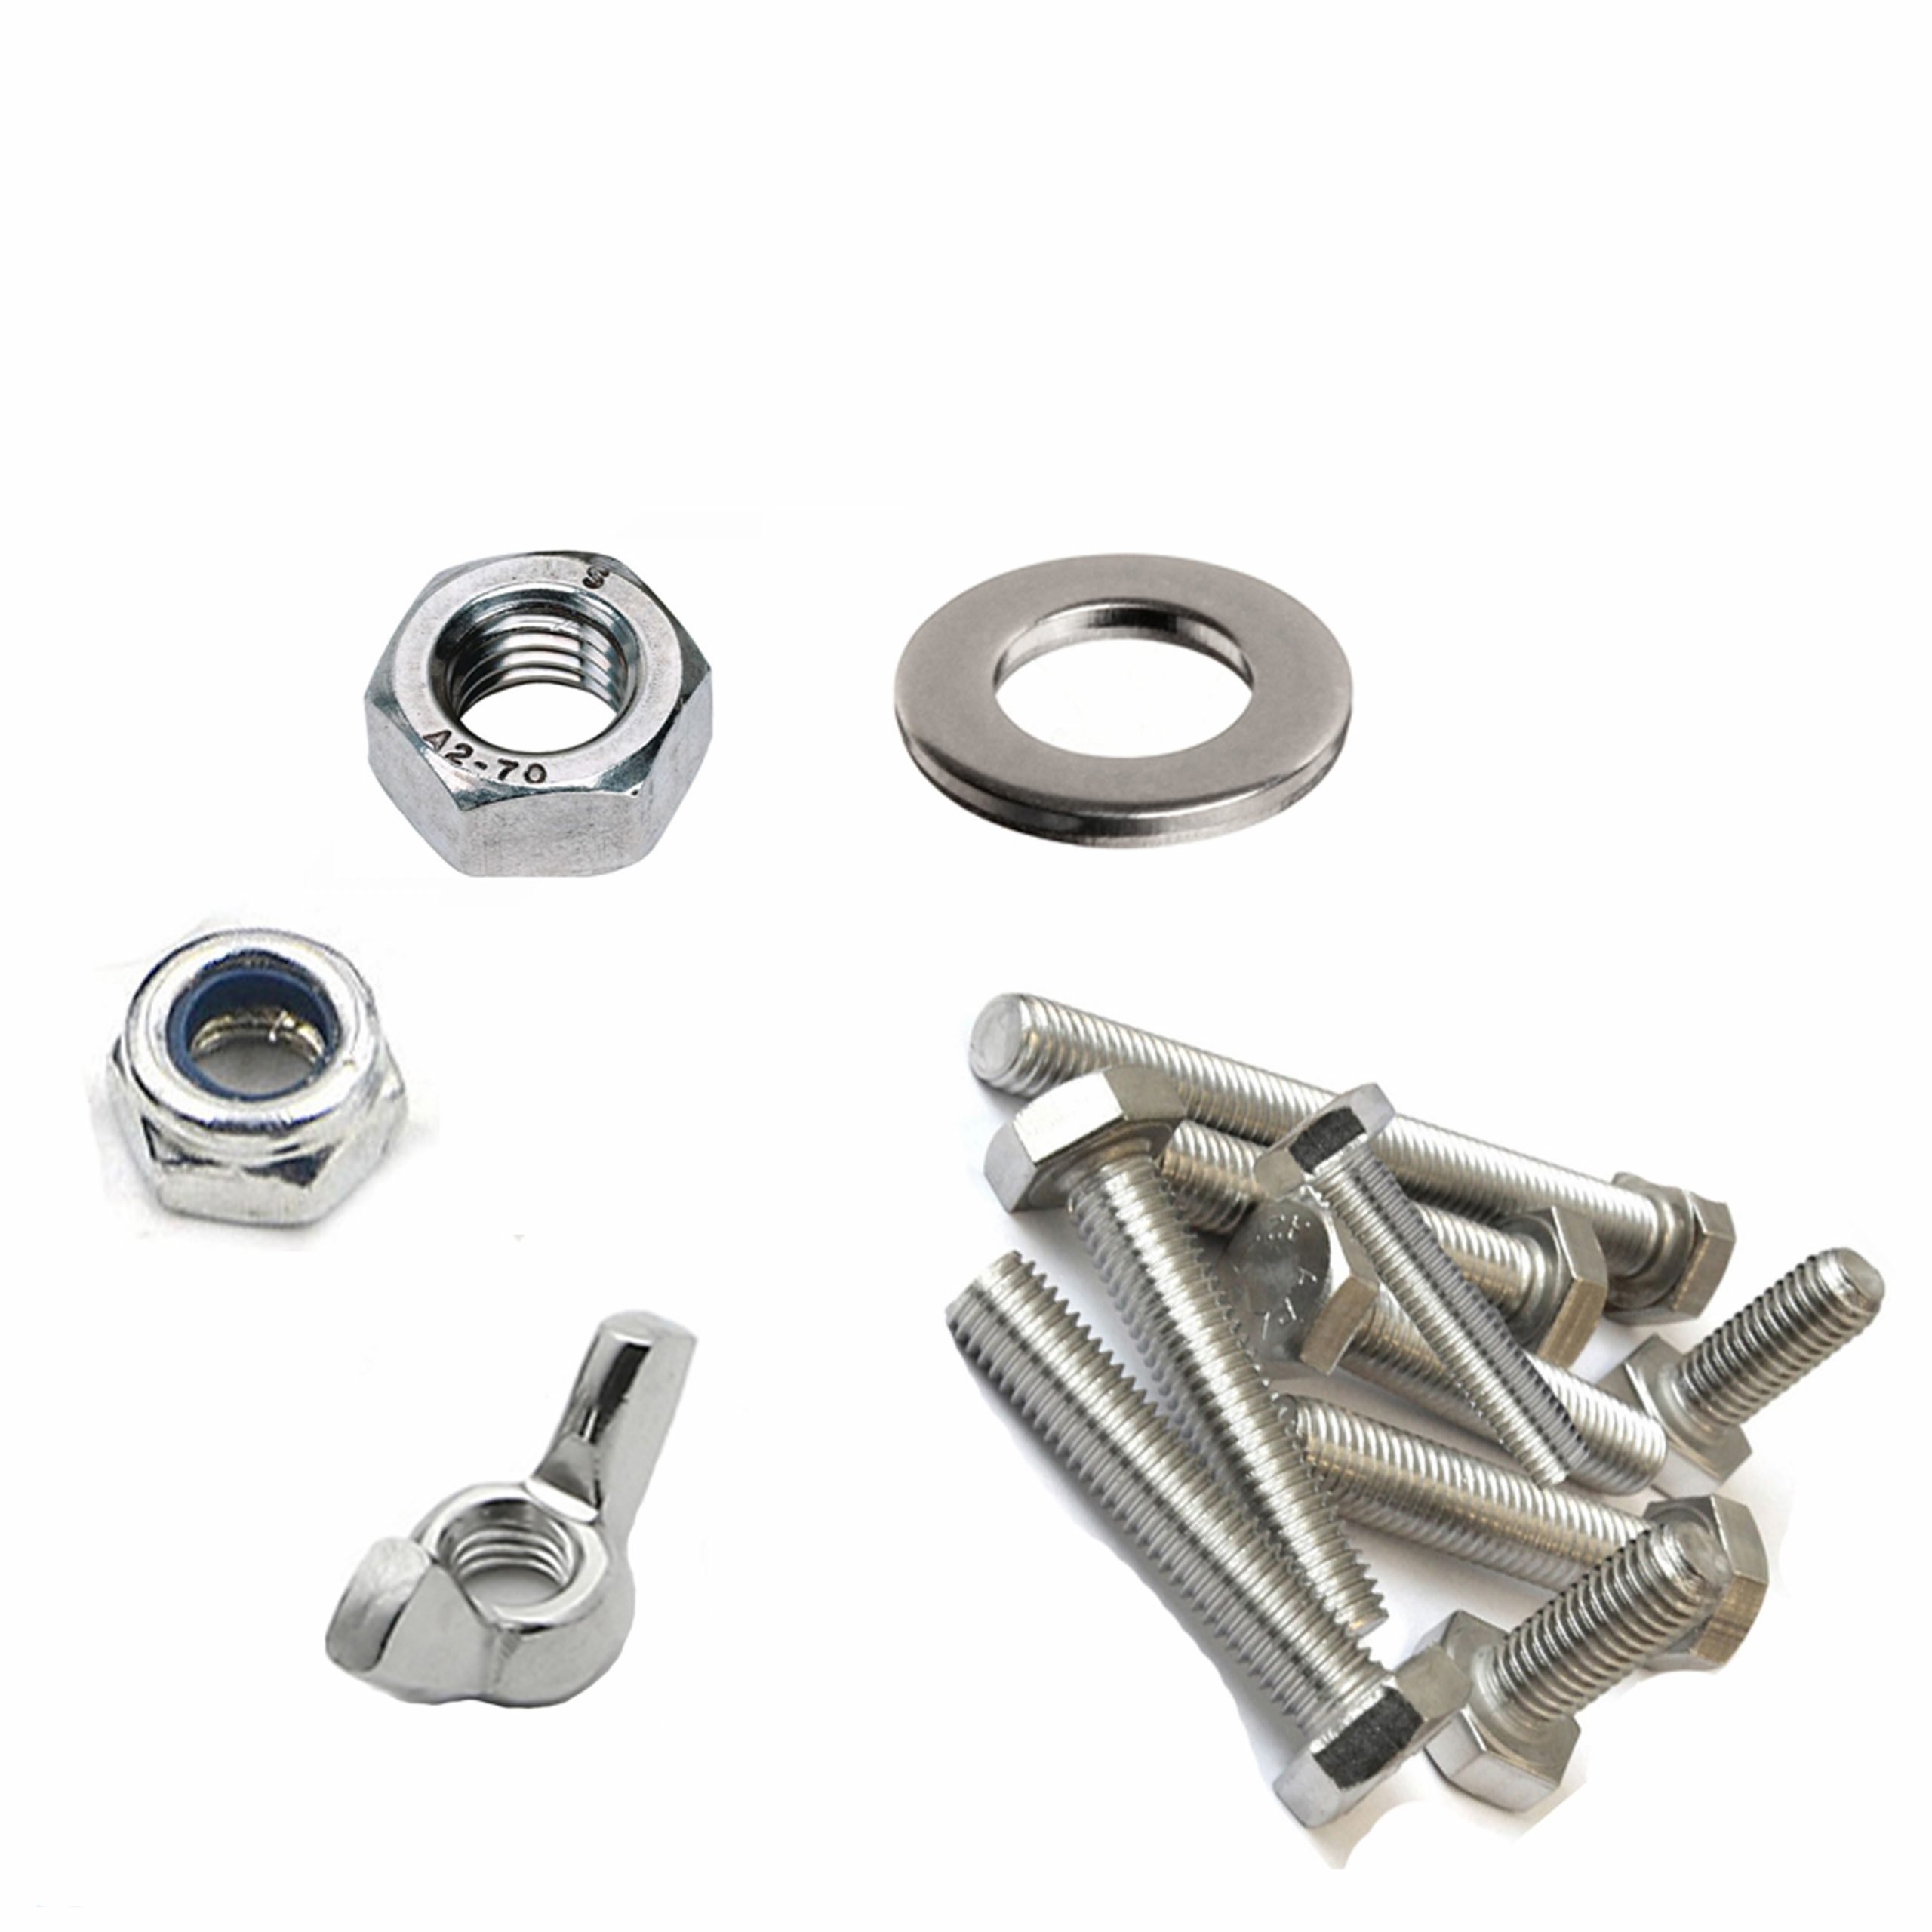 Set Screws Full Thread Bolts With Nuts and Washers Stainless Steel